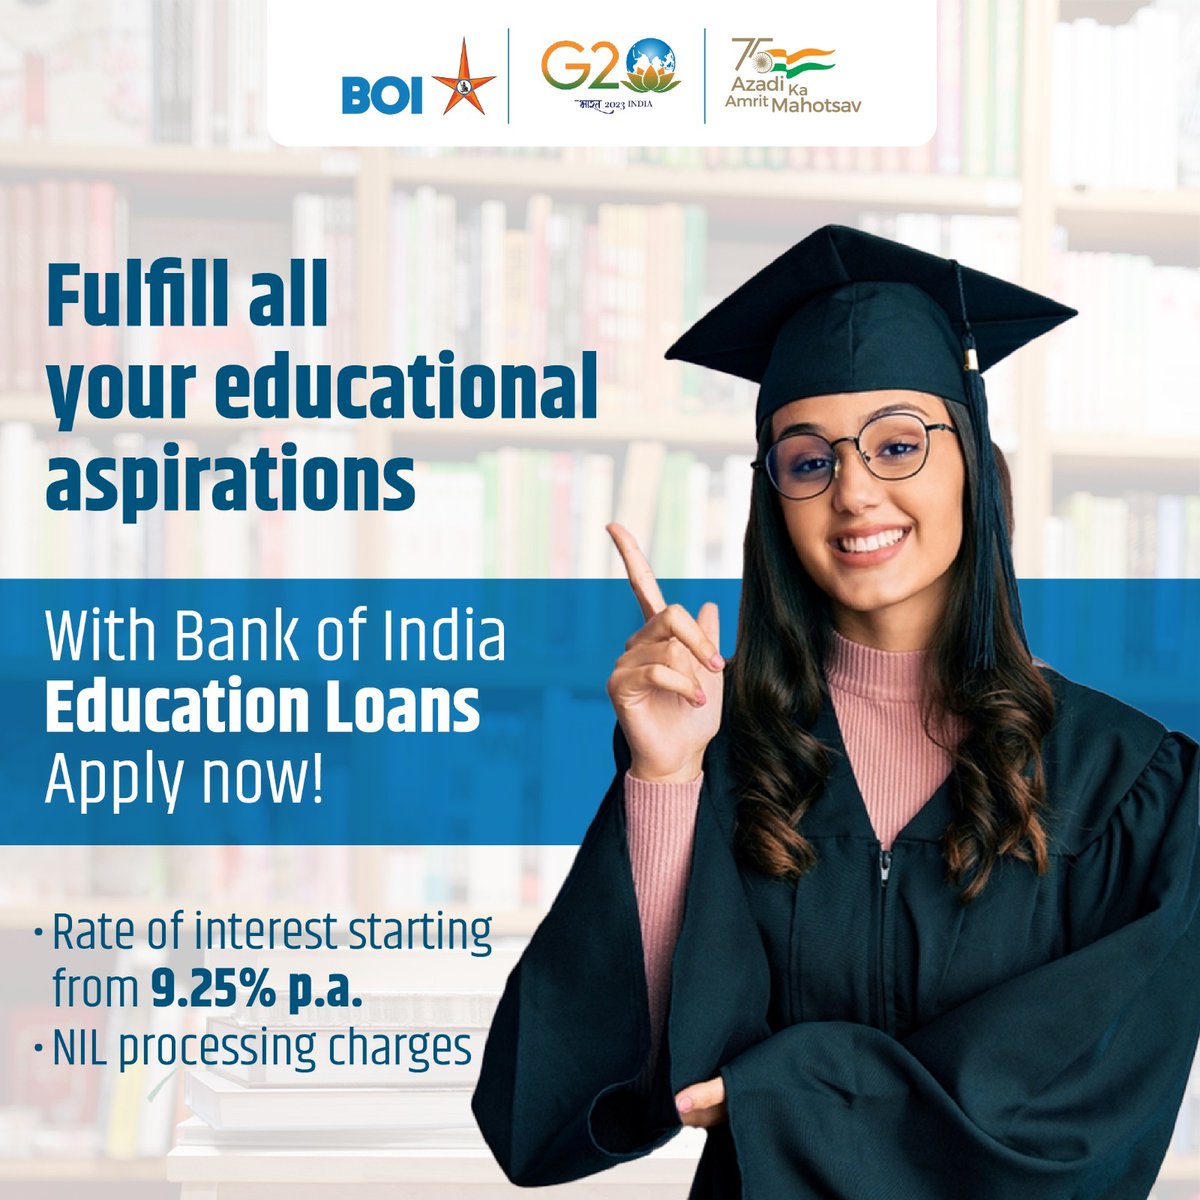 Now you have an opportunity to get into a college of your choice with BOI Education Loans. Click here to fulfill all your educational aspirations: bit.ly/3o2x3bO
#BankofIndia #AmritMahotsav #educationloan #education #aspirations #opportunity